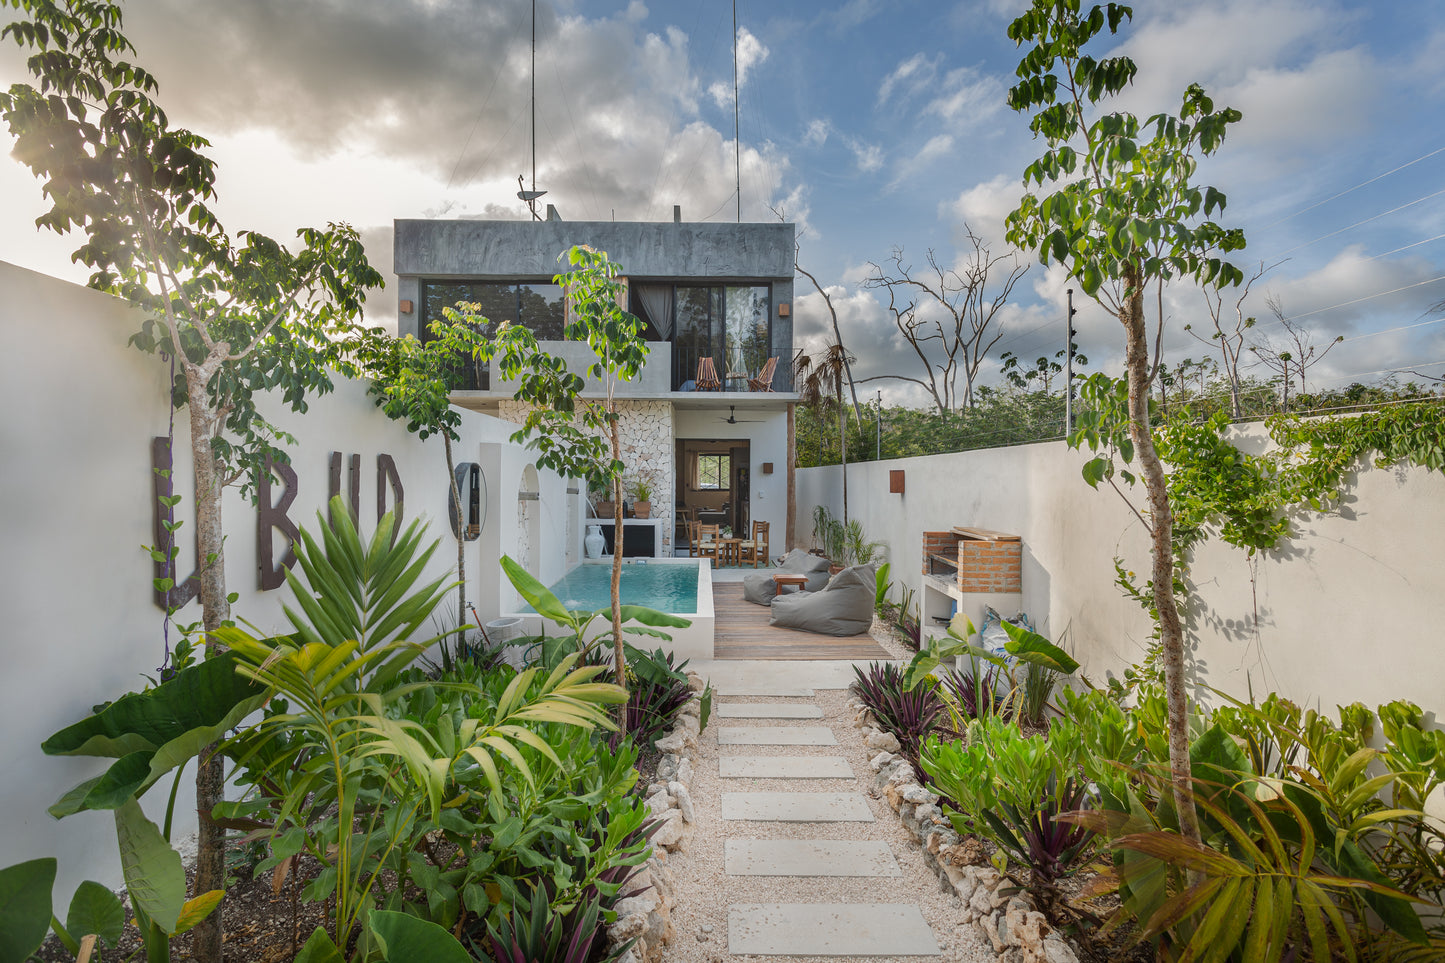 2 Bedroom Townhouse at Tulum with Cenote Access